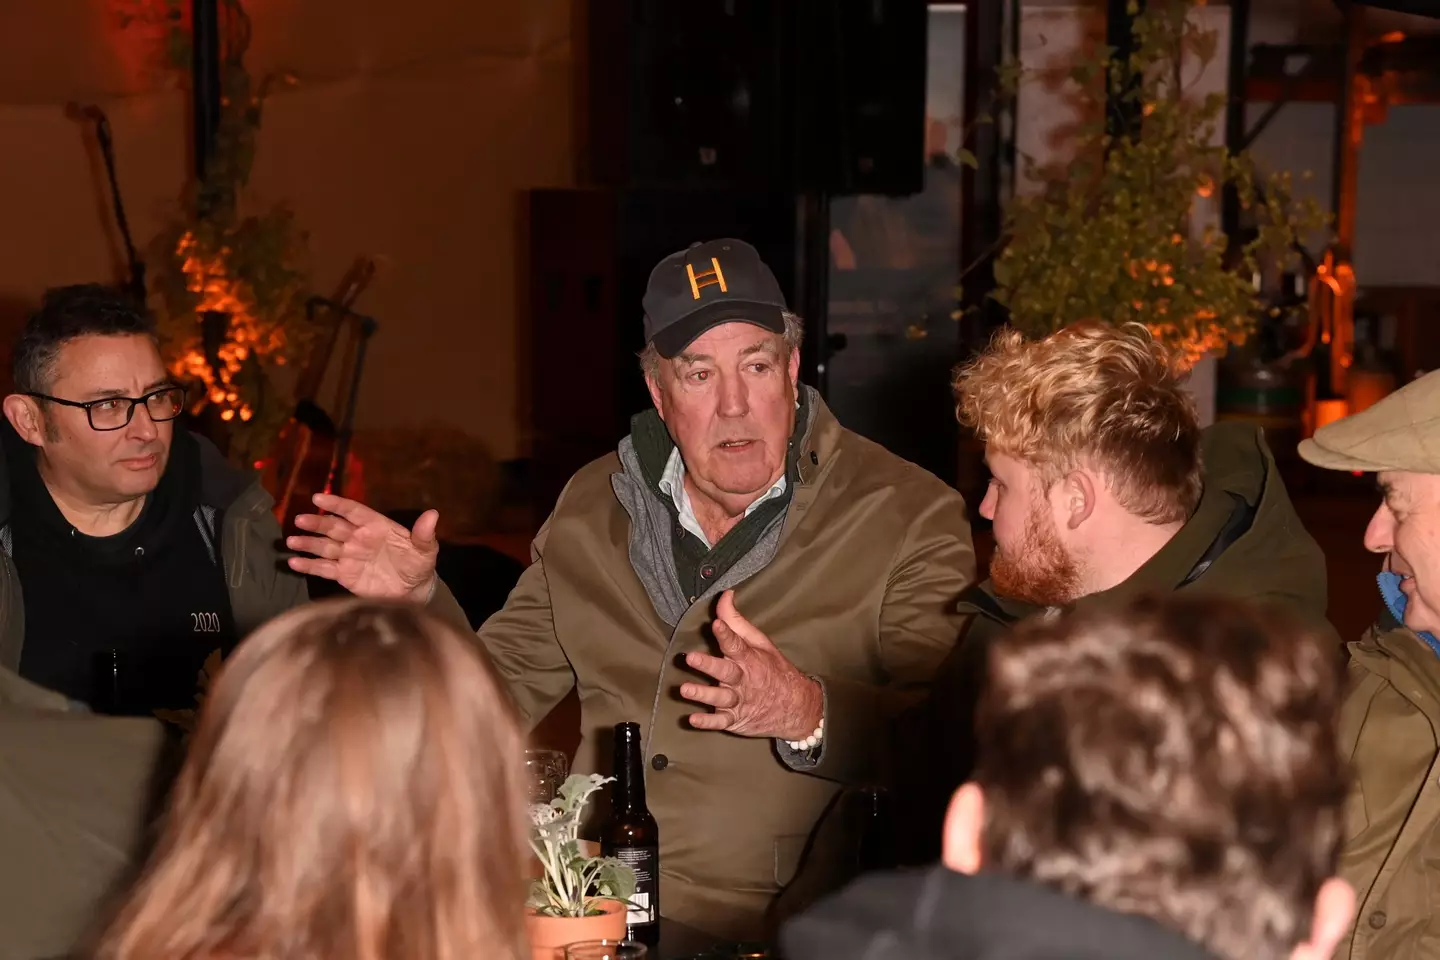 Clarkson has diversified his farm to try and make more cash (David M. Benett/Dave Benett/Getty Images for Hawkstone)